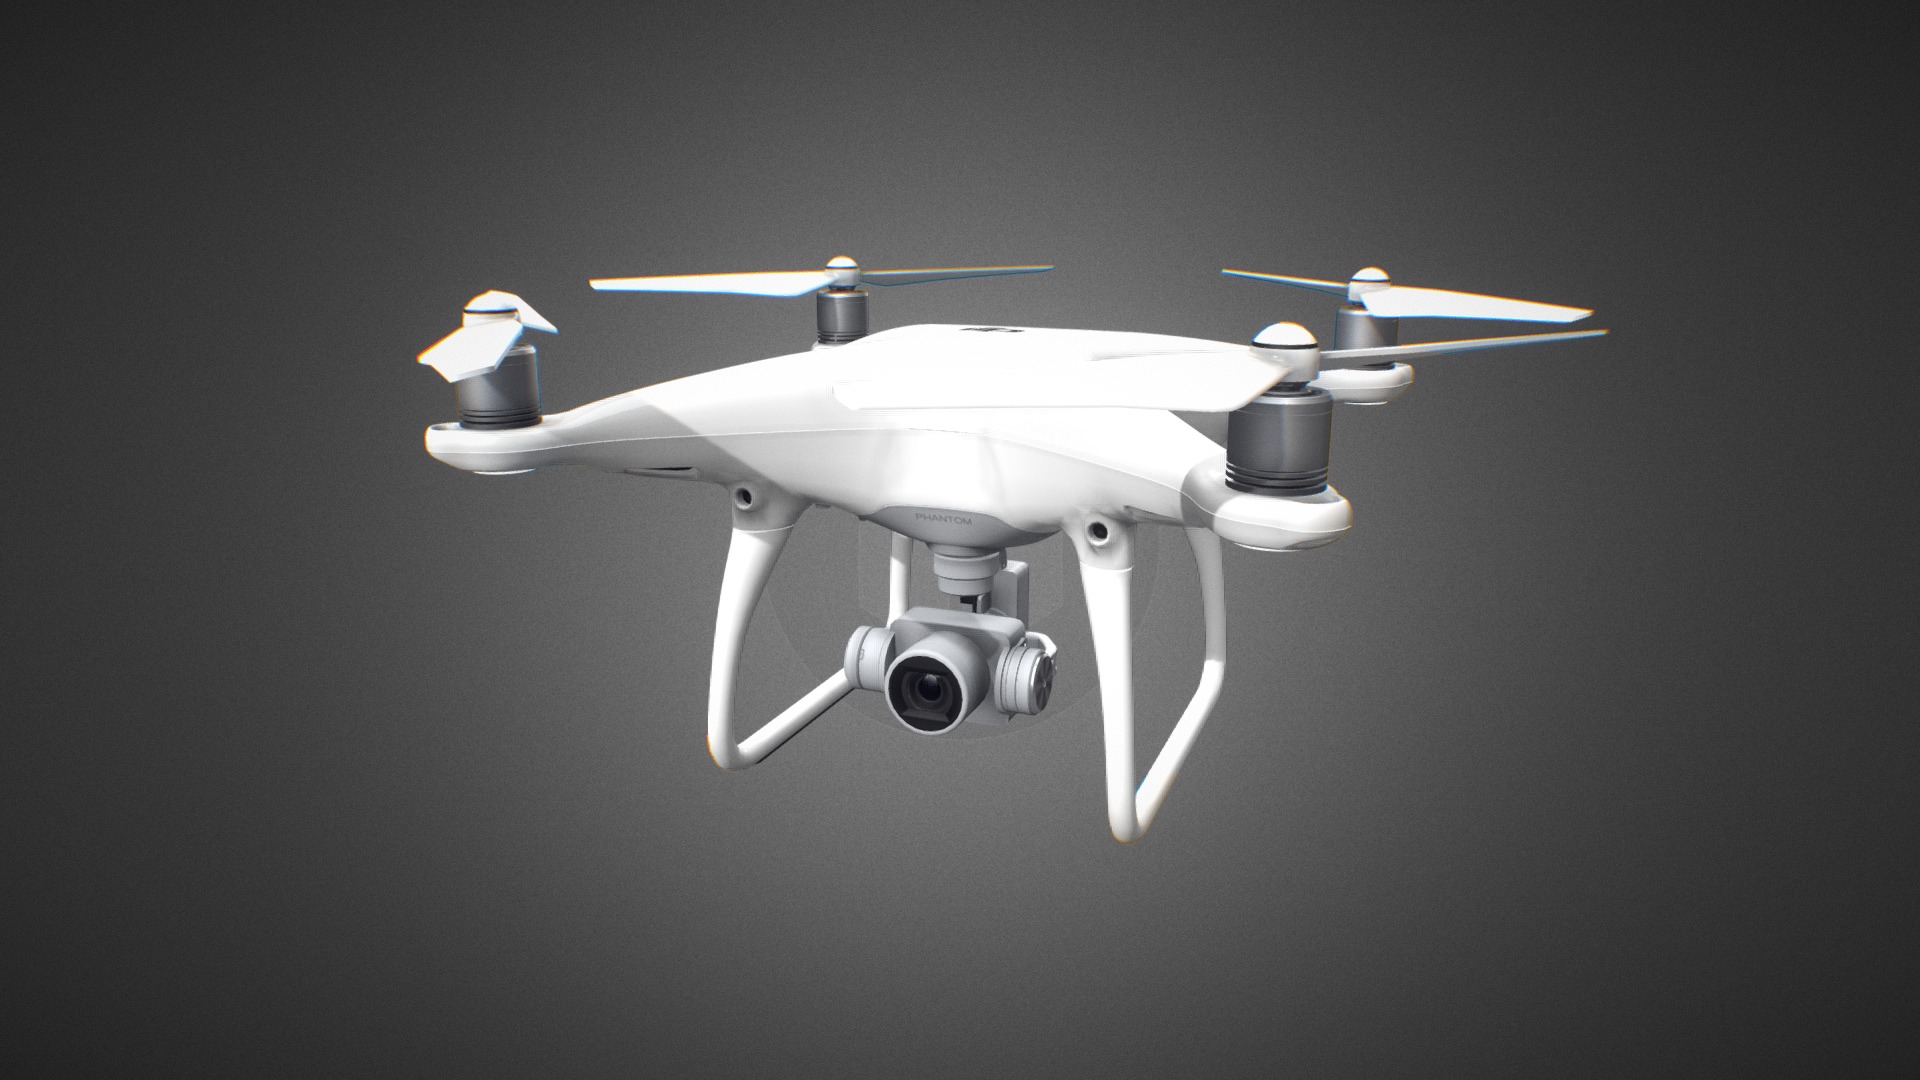 3D model DJI Phantom 4 Pro for Element 3D - This is a 3D model of the DJI Phantom 4 Pro for Element 3D. The 3D model is about a drone with a black background.